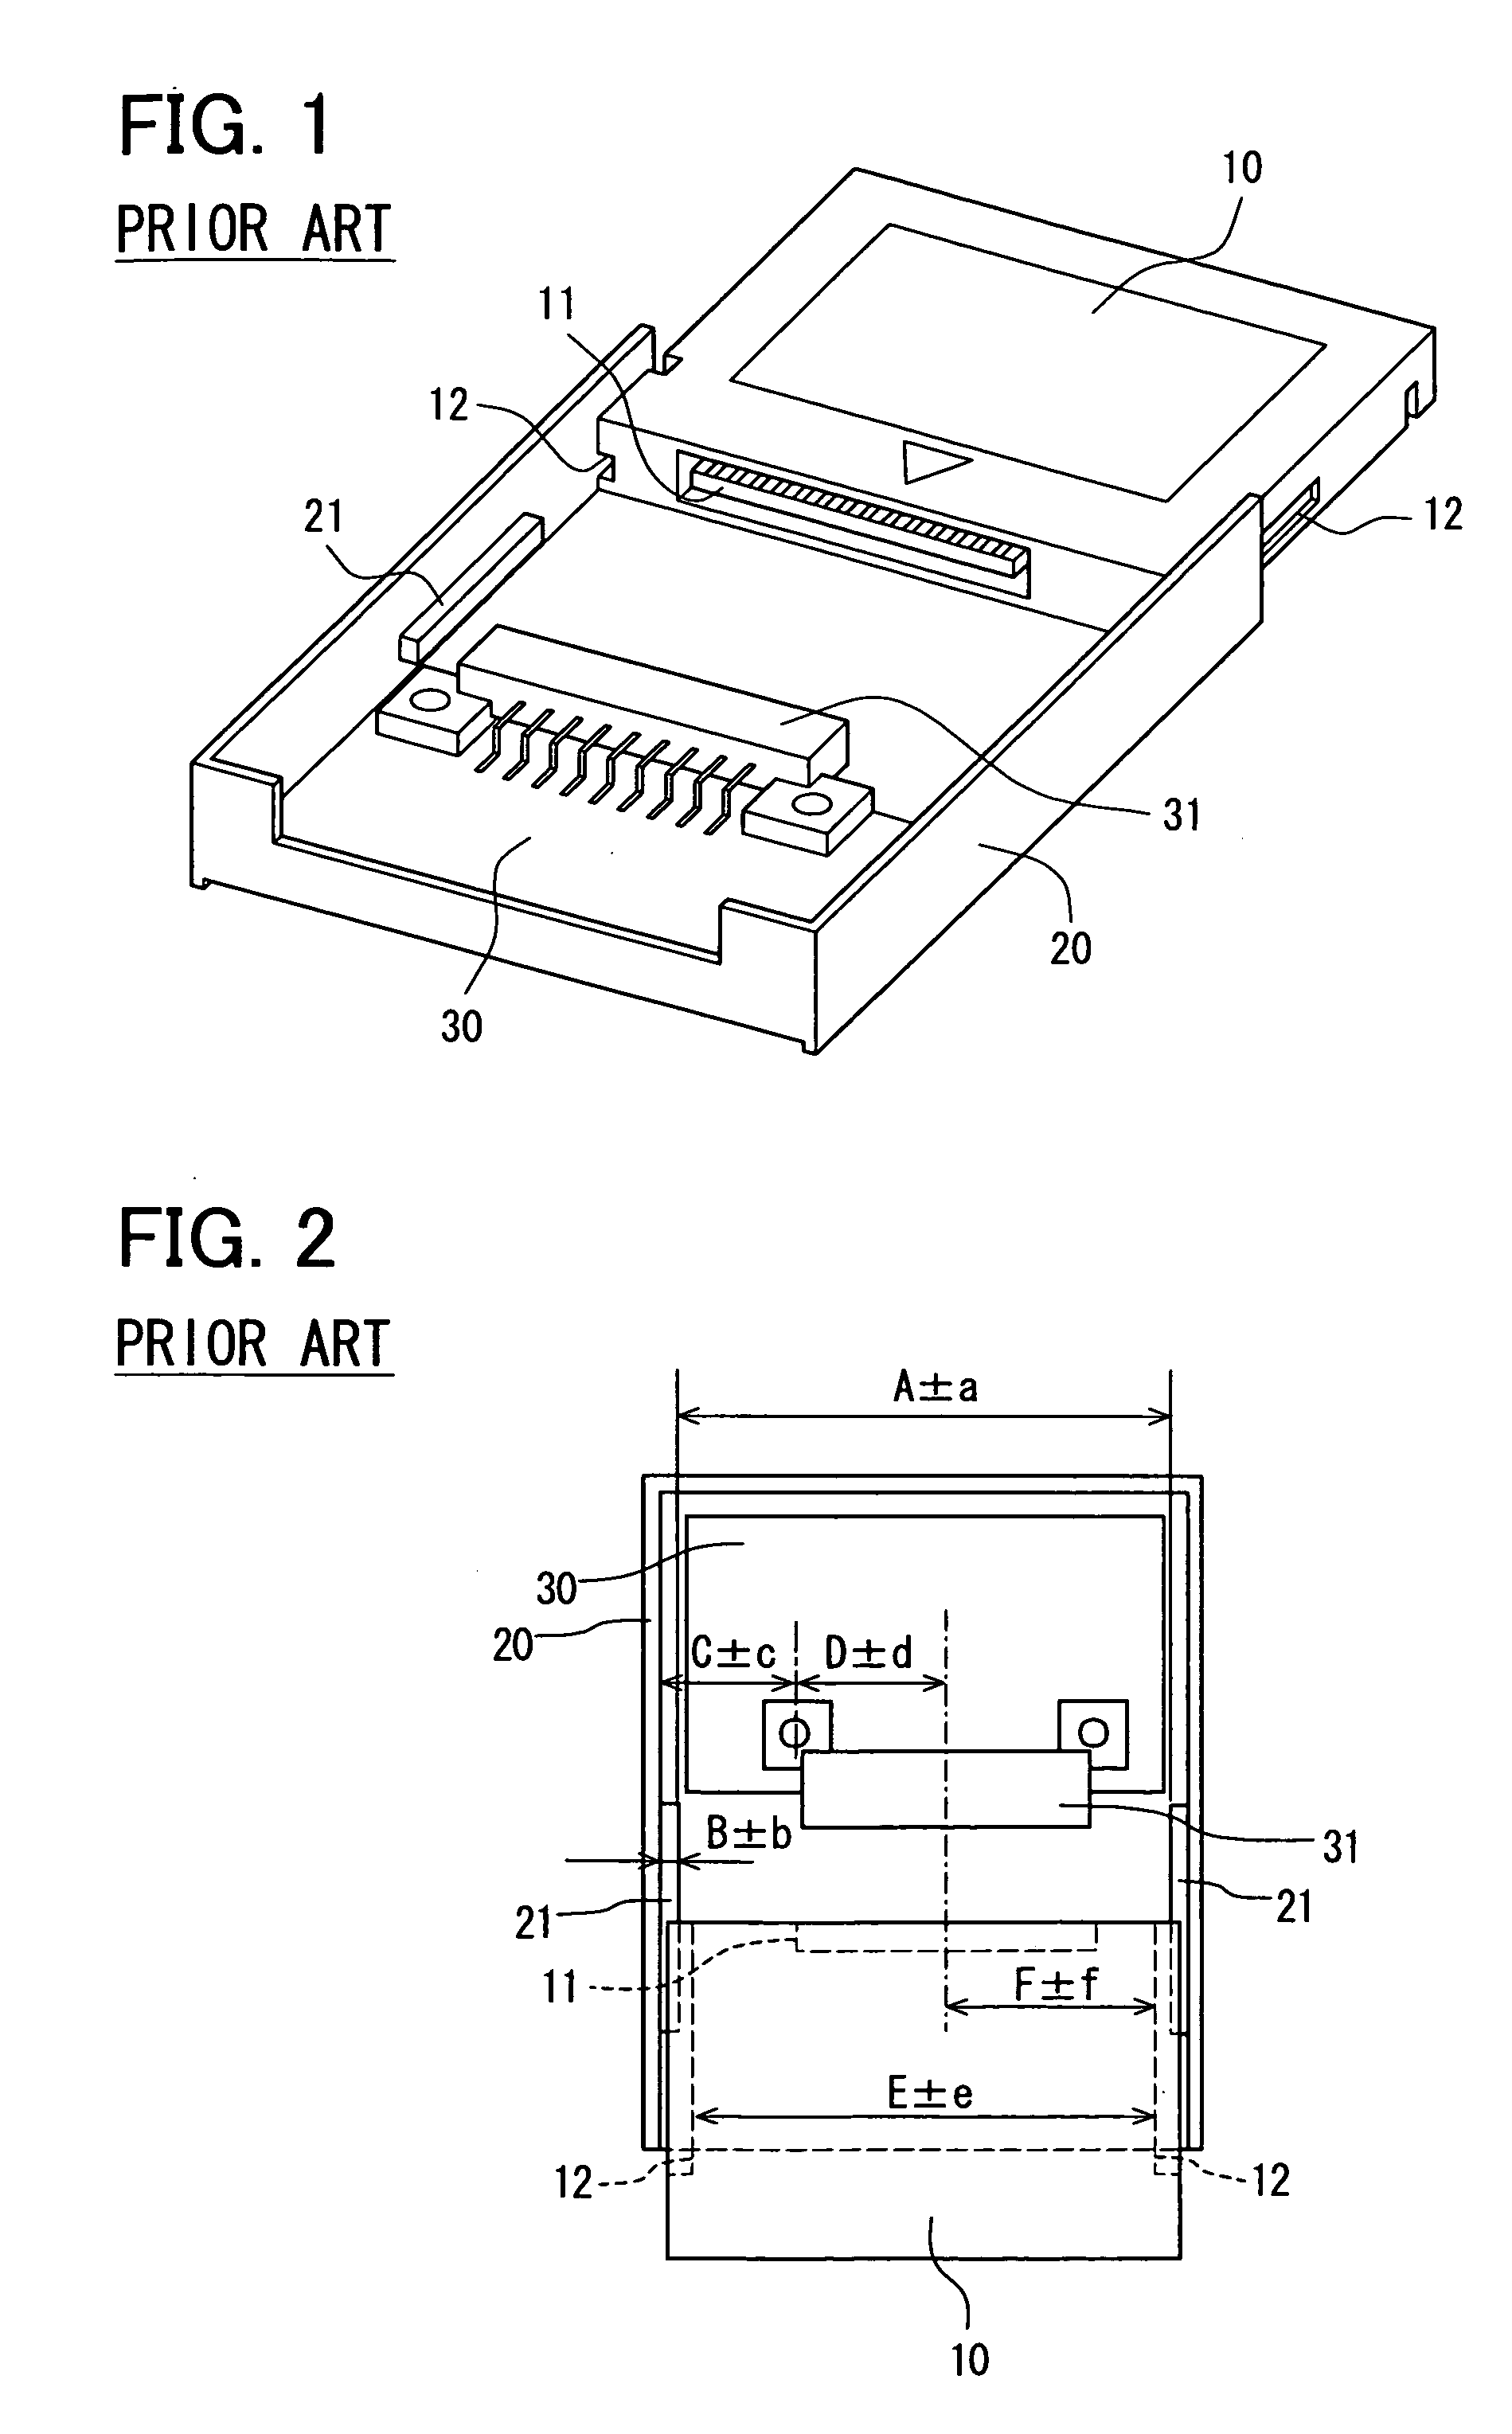 Connector having coupling guides for establishing connection with memory connector at right position